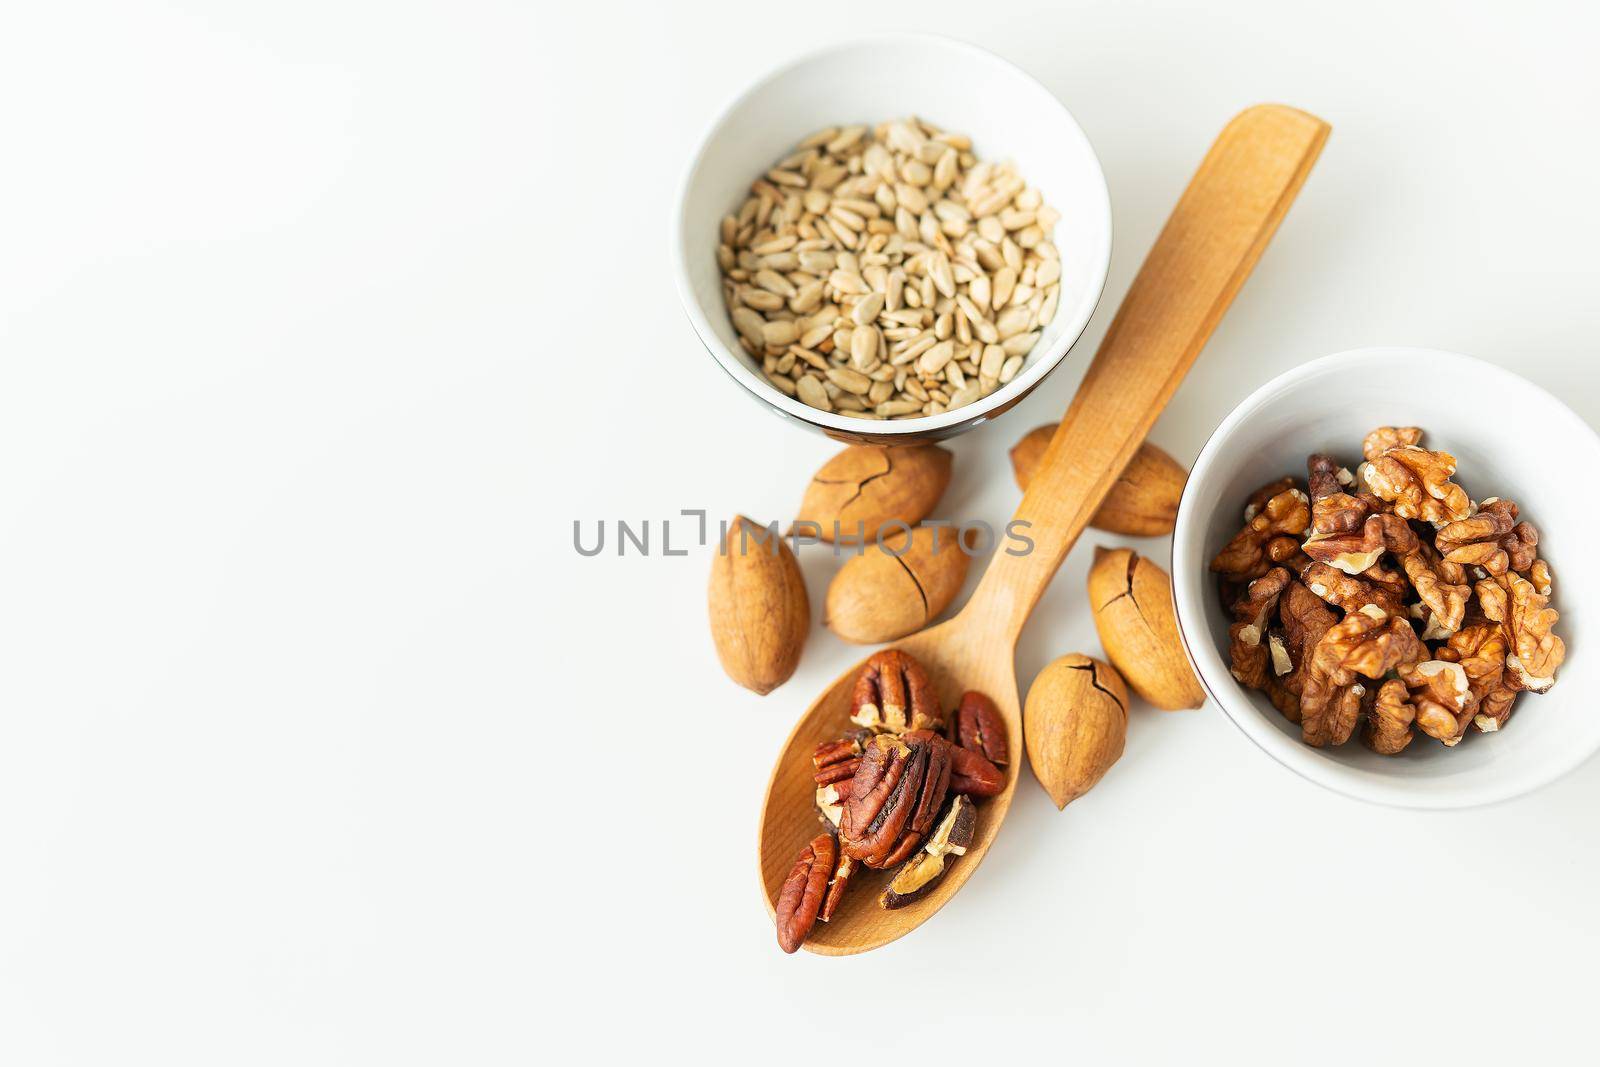 A close-up of a plate with different nuts and seeds along with a wooden spoon lie on a white table. The concept of weight loss, healthy eating, overweight. Fitness menu